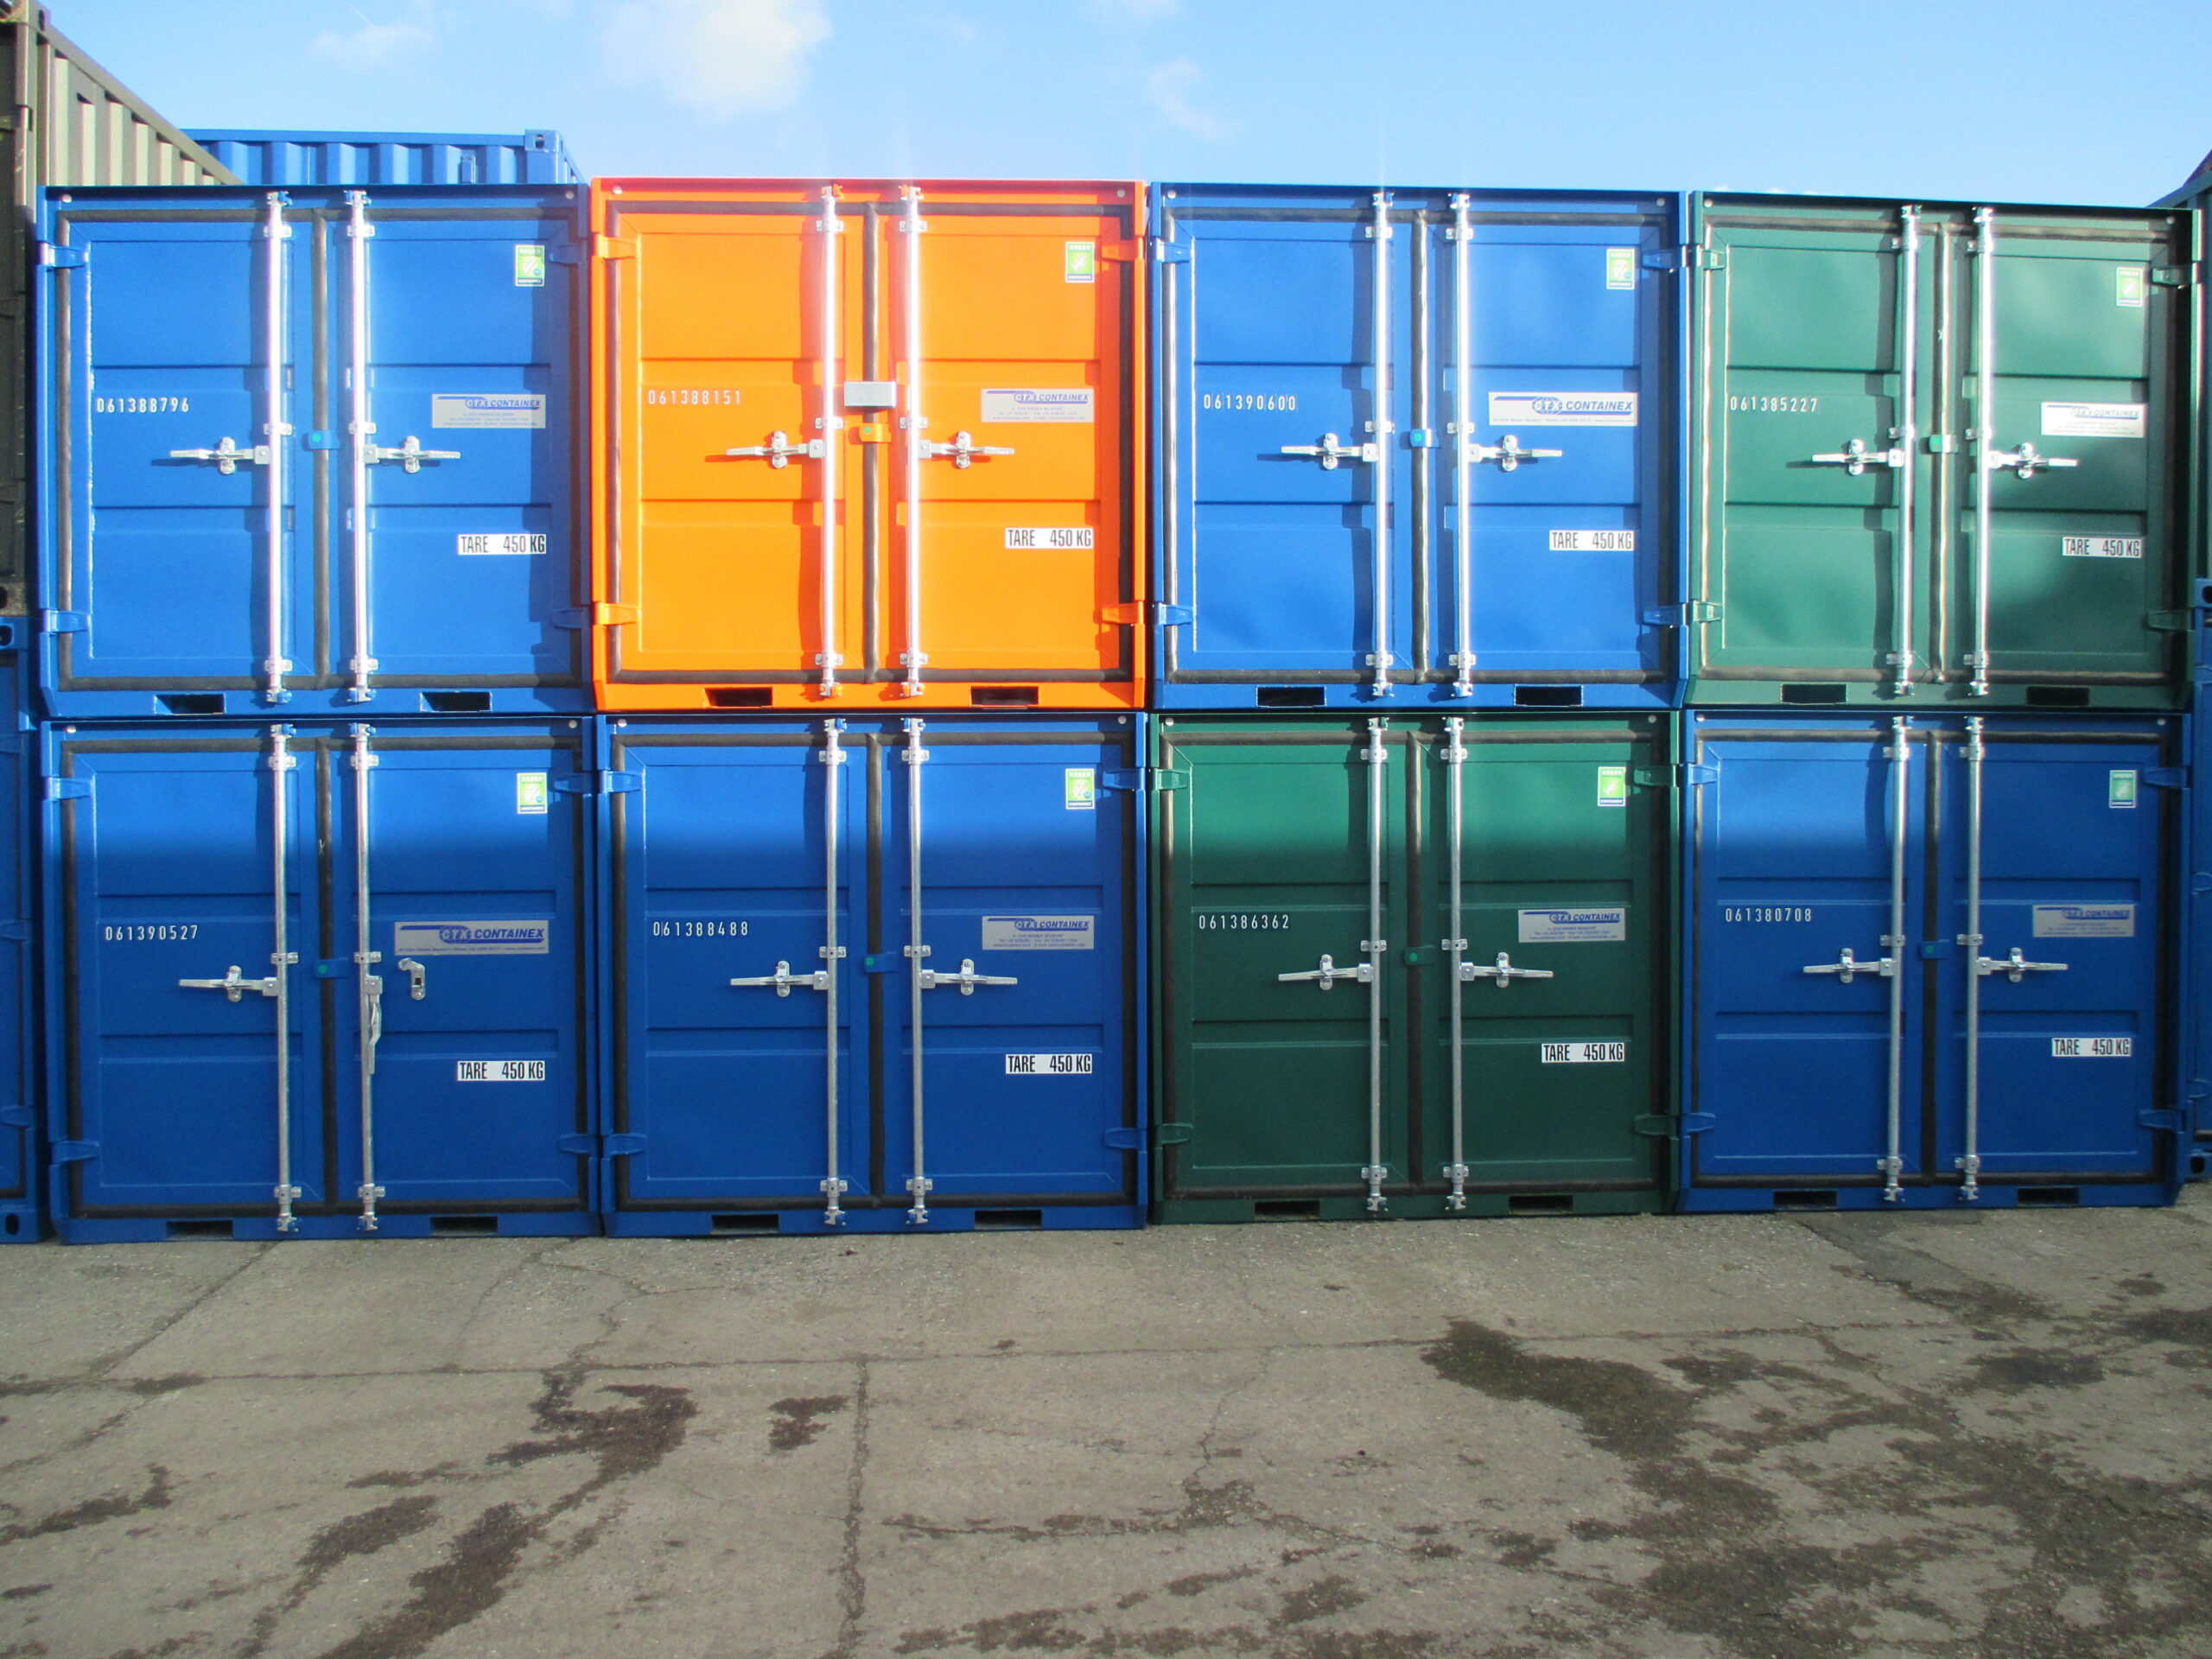 Shipping Containers for sale in Bristol - Shipping Containers Bristol - Gap Containers Ltd